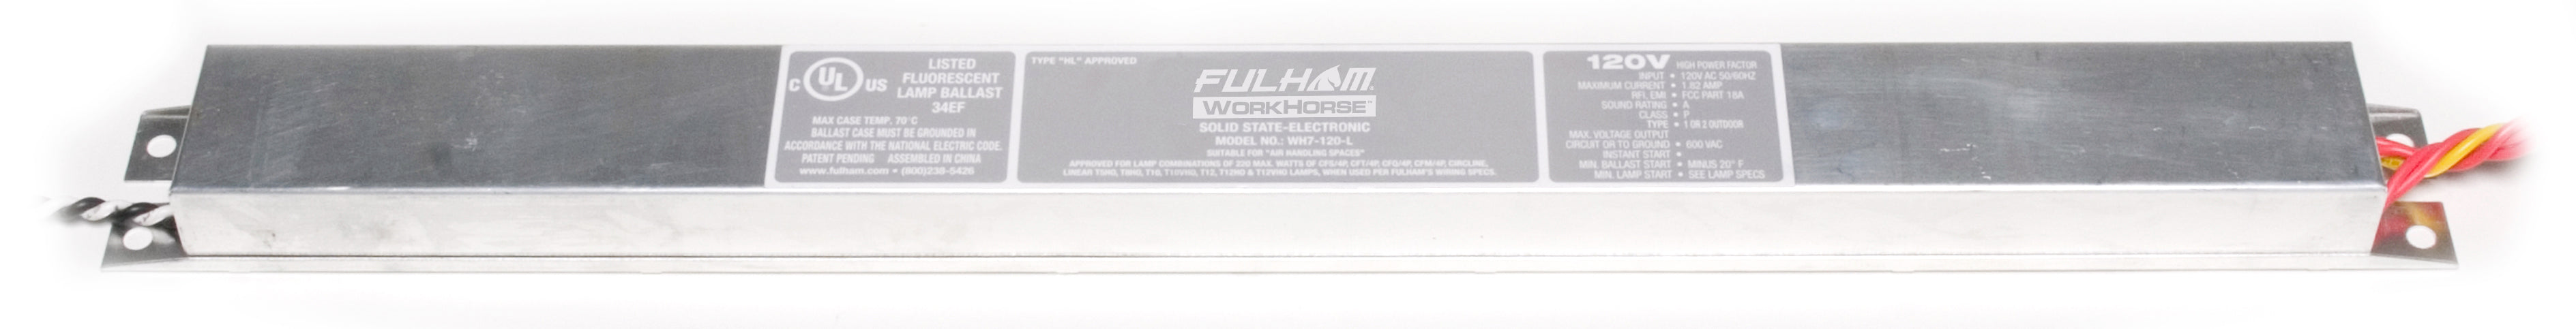 Fulham Instant Start Electronic Fluorescent Workhorse Ballast For (1-4) 220W Maximum Lamps Run At 120V (WH7-120-L)